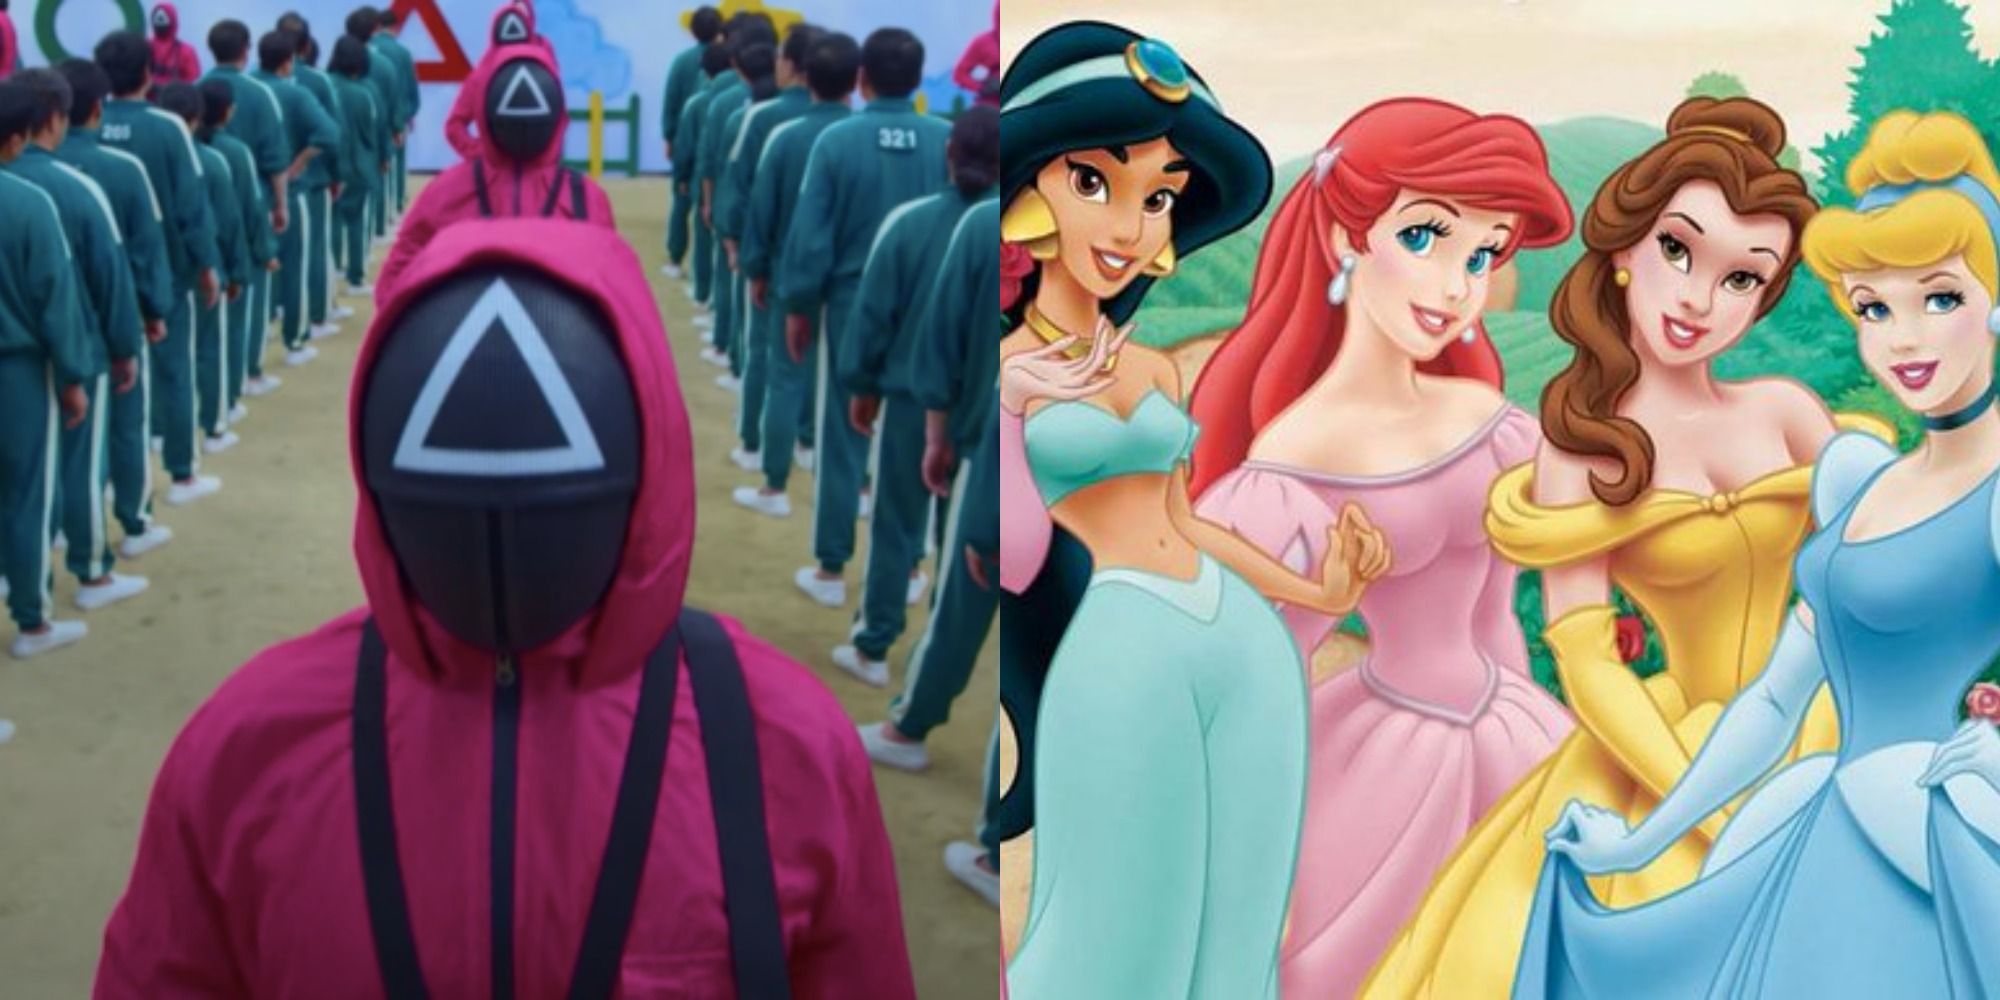 Split image showing the guards from Squid Game and four Disney Princesses